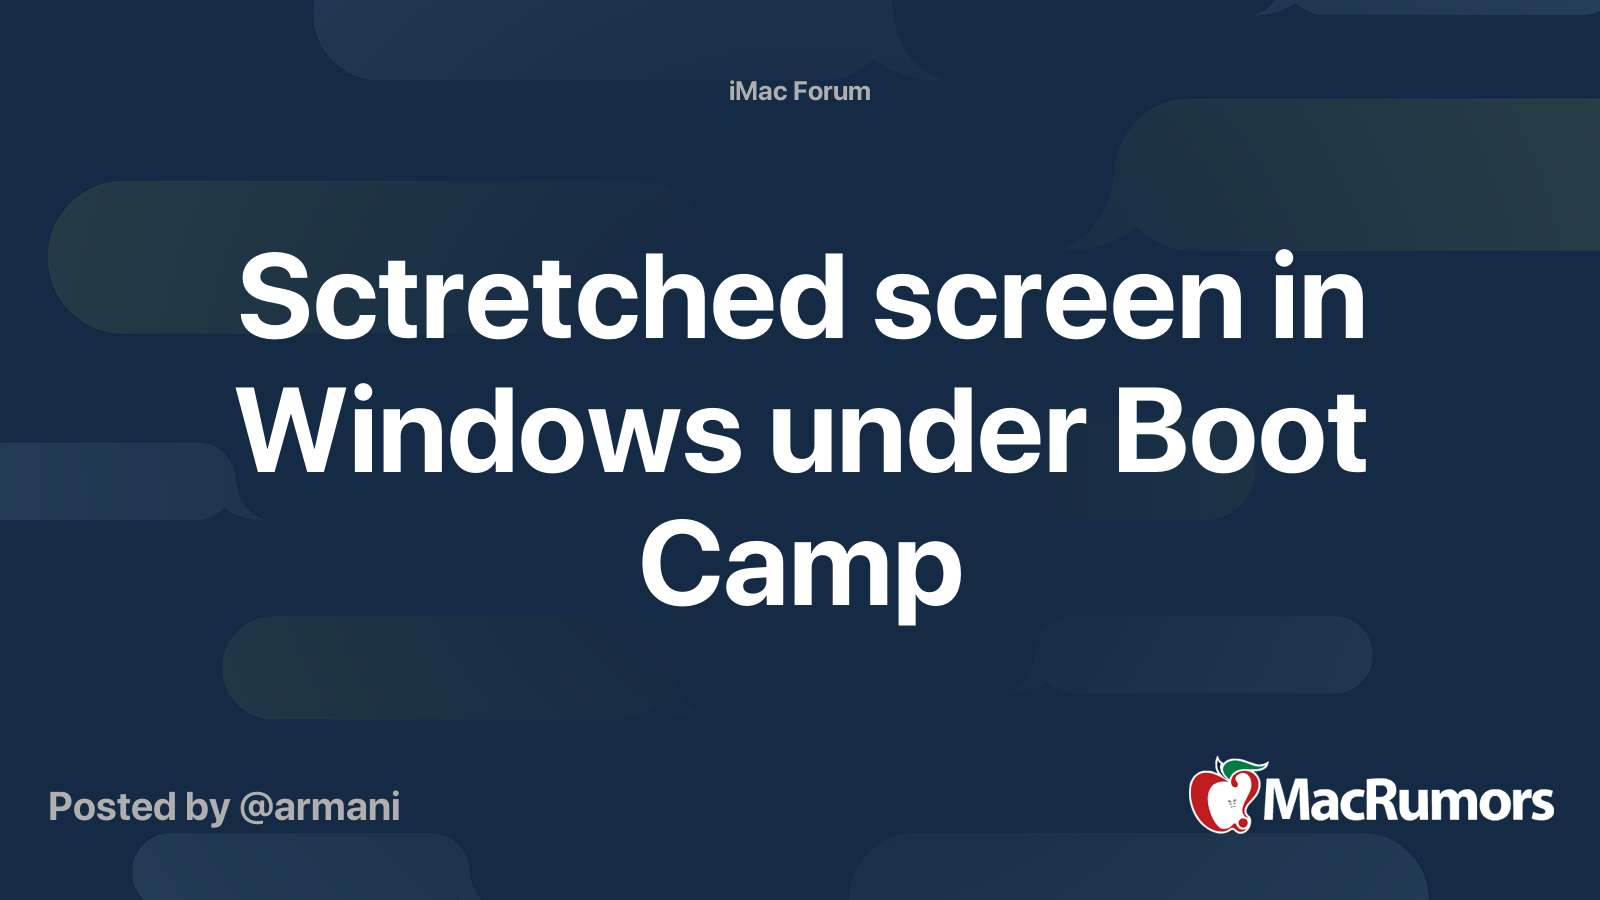 Sctretched screen in Windows under Boot Camp | MacRumors ...